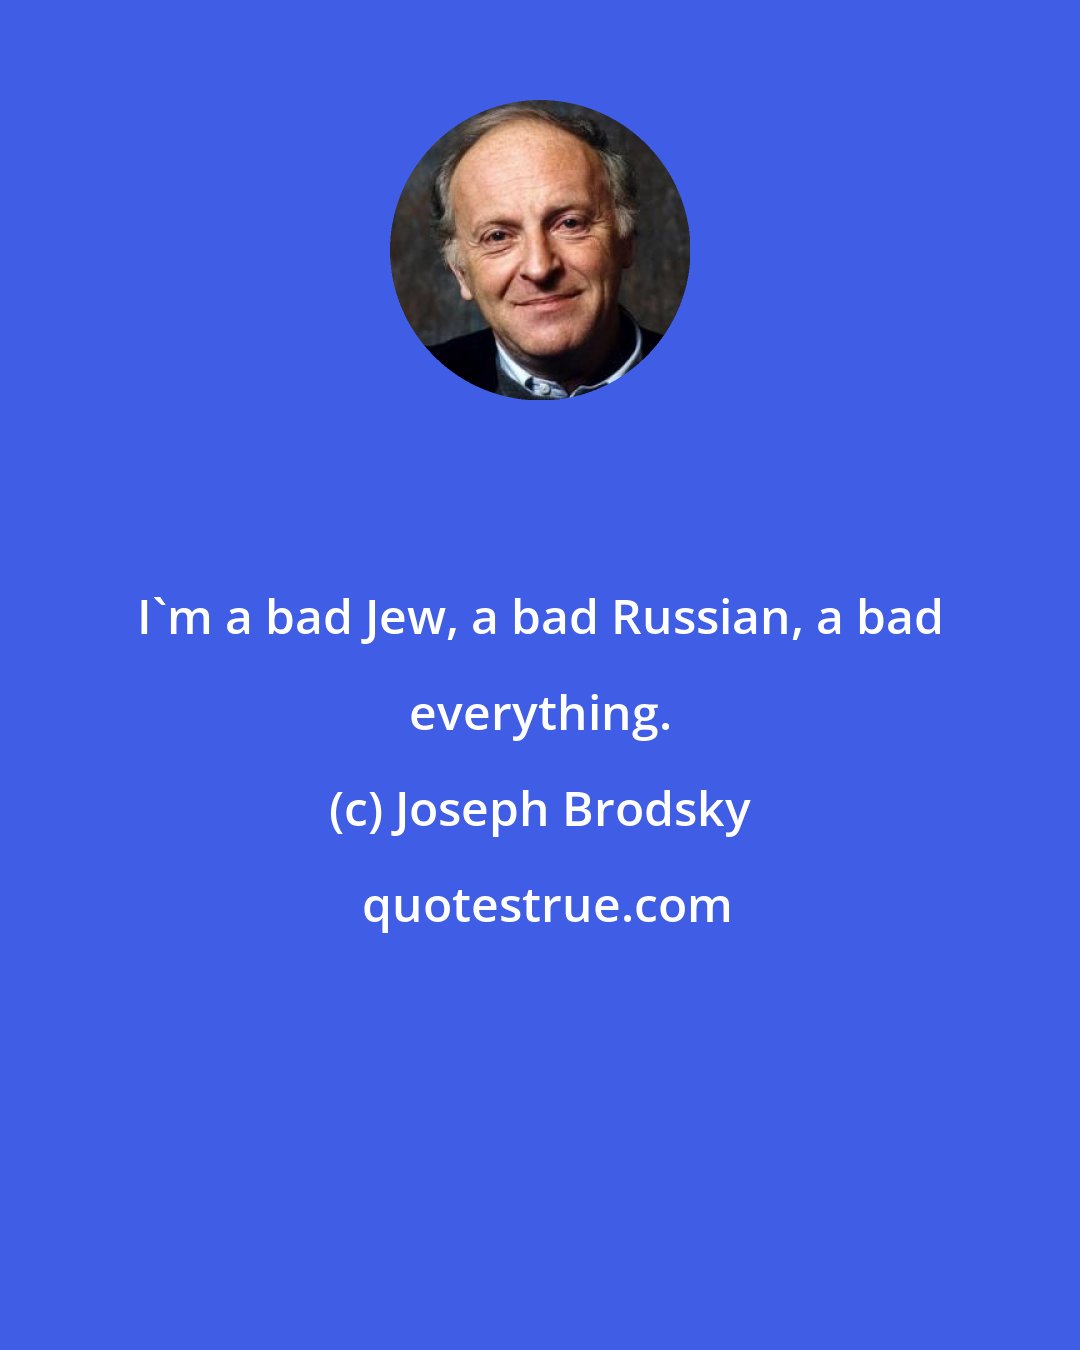 Joseph Brodsky: I'm a bad Jew, a bad Russian, a bad everything.